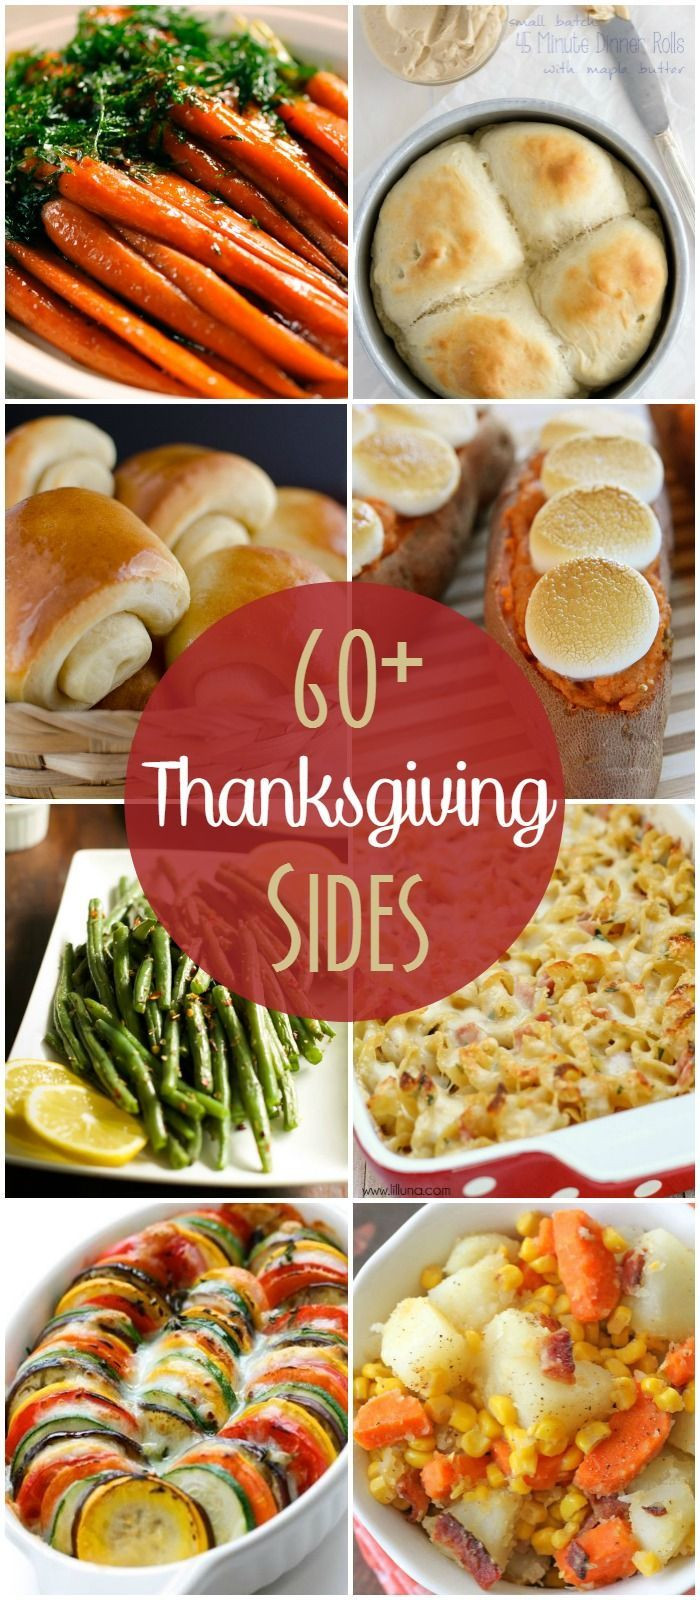 Interesting Thanksgiving Side Dishes
 101 best images about Fun Stuff on Pinterest